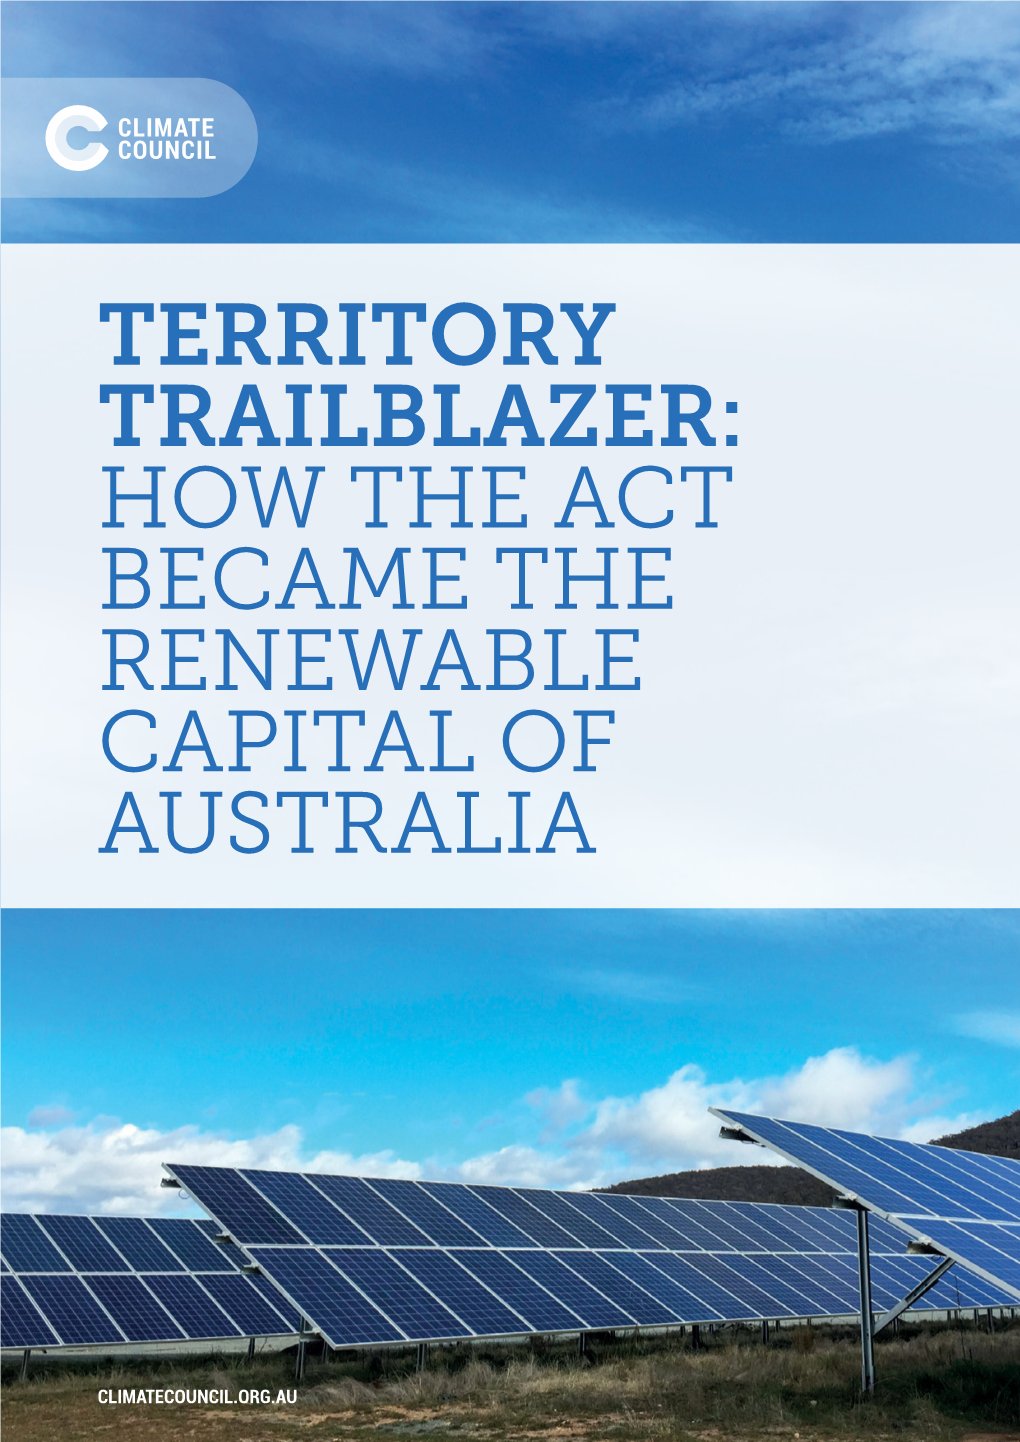 How the Act Became the Renewable Capital of Australia